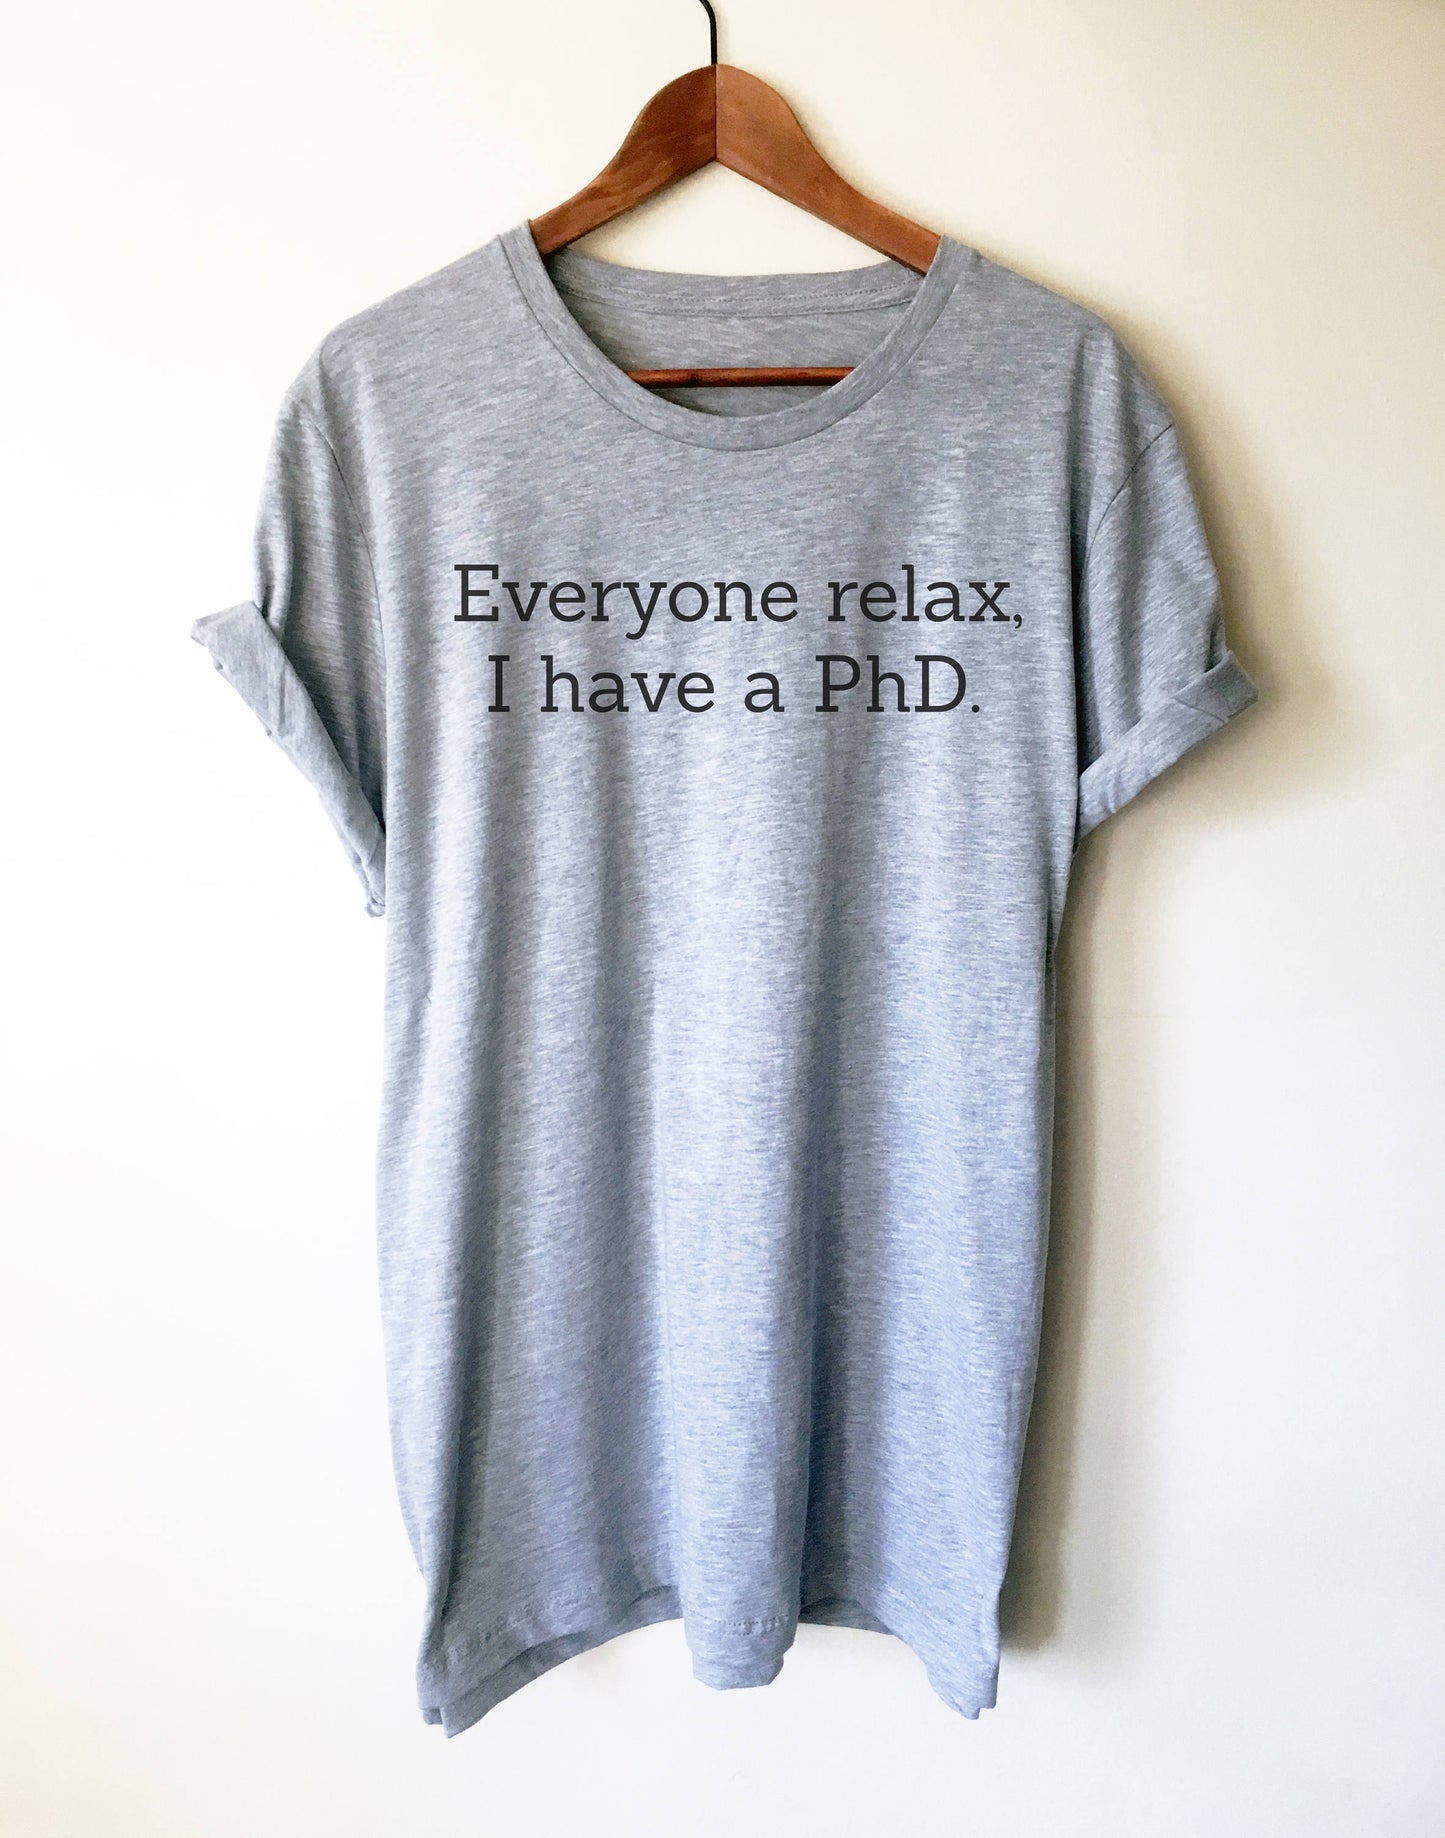 Everyone Relax, I Have A PhD Unisex Shirt - phd graduation gift - Doctor Gift For Her - Funny Doctor T-Shirt - Unique Doctor Shirt